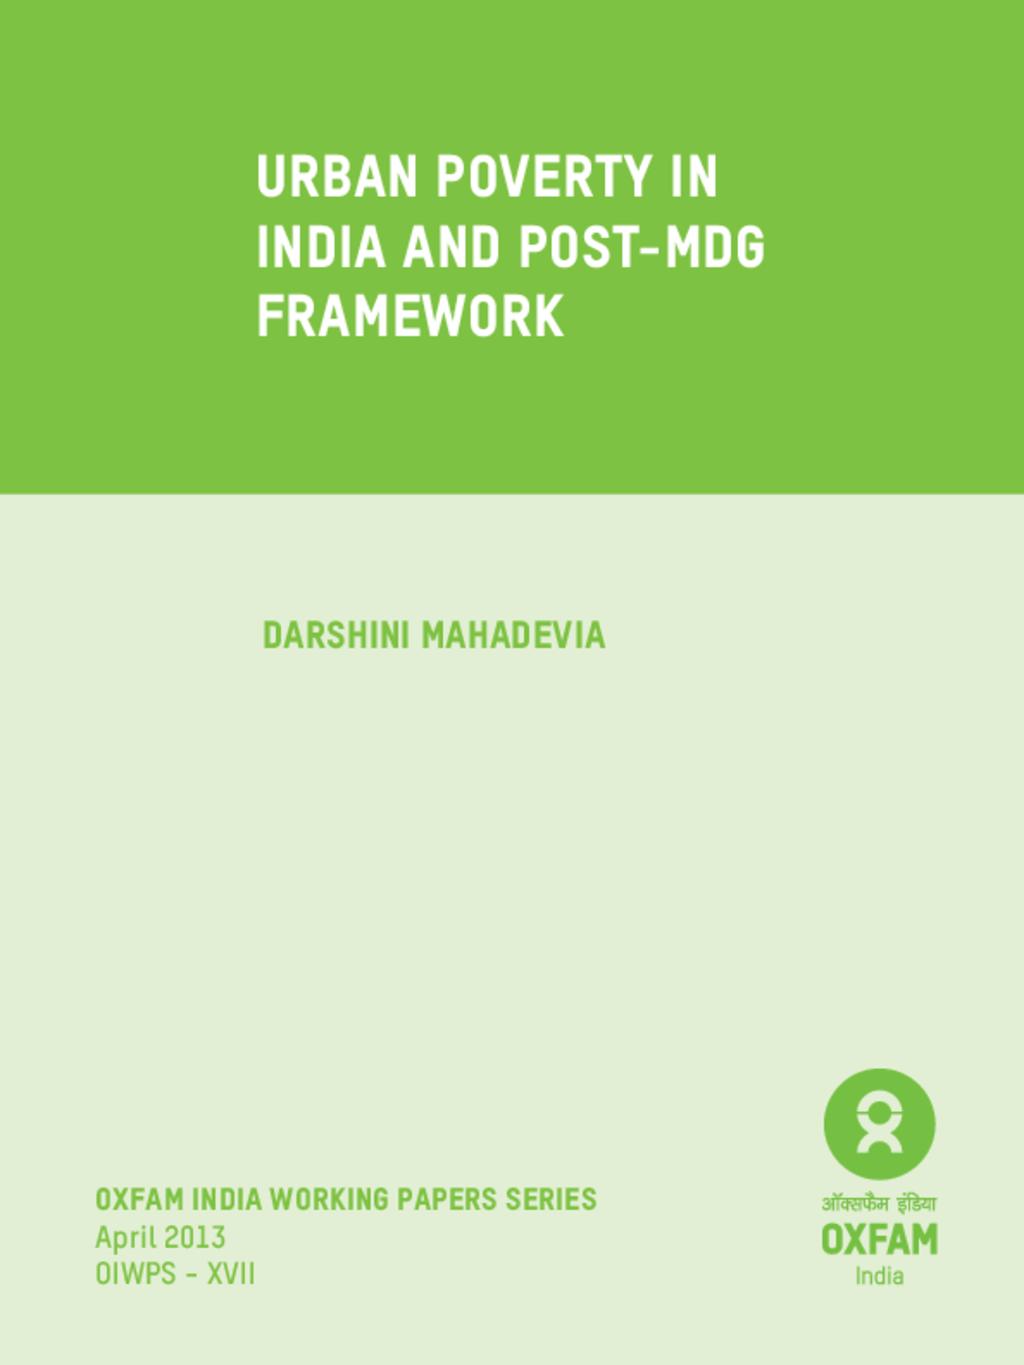 Urban Poverty in India and Post-MDG Framework